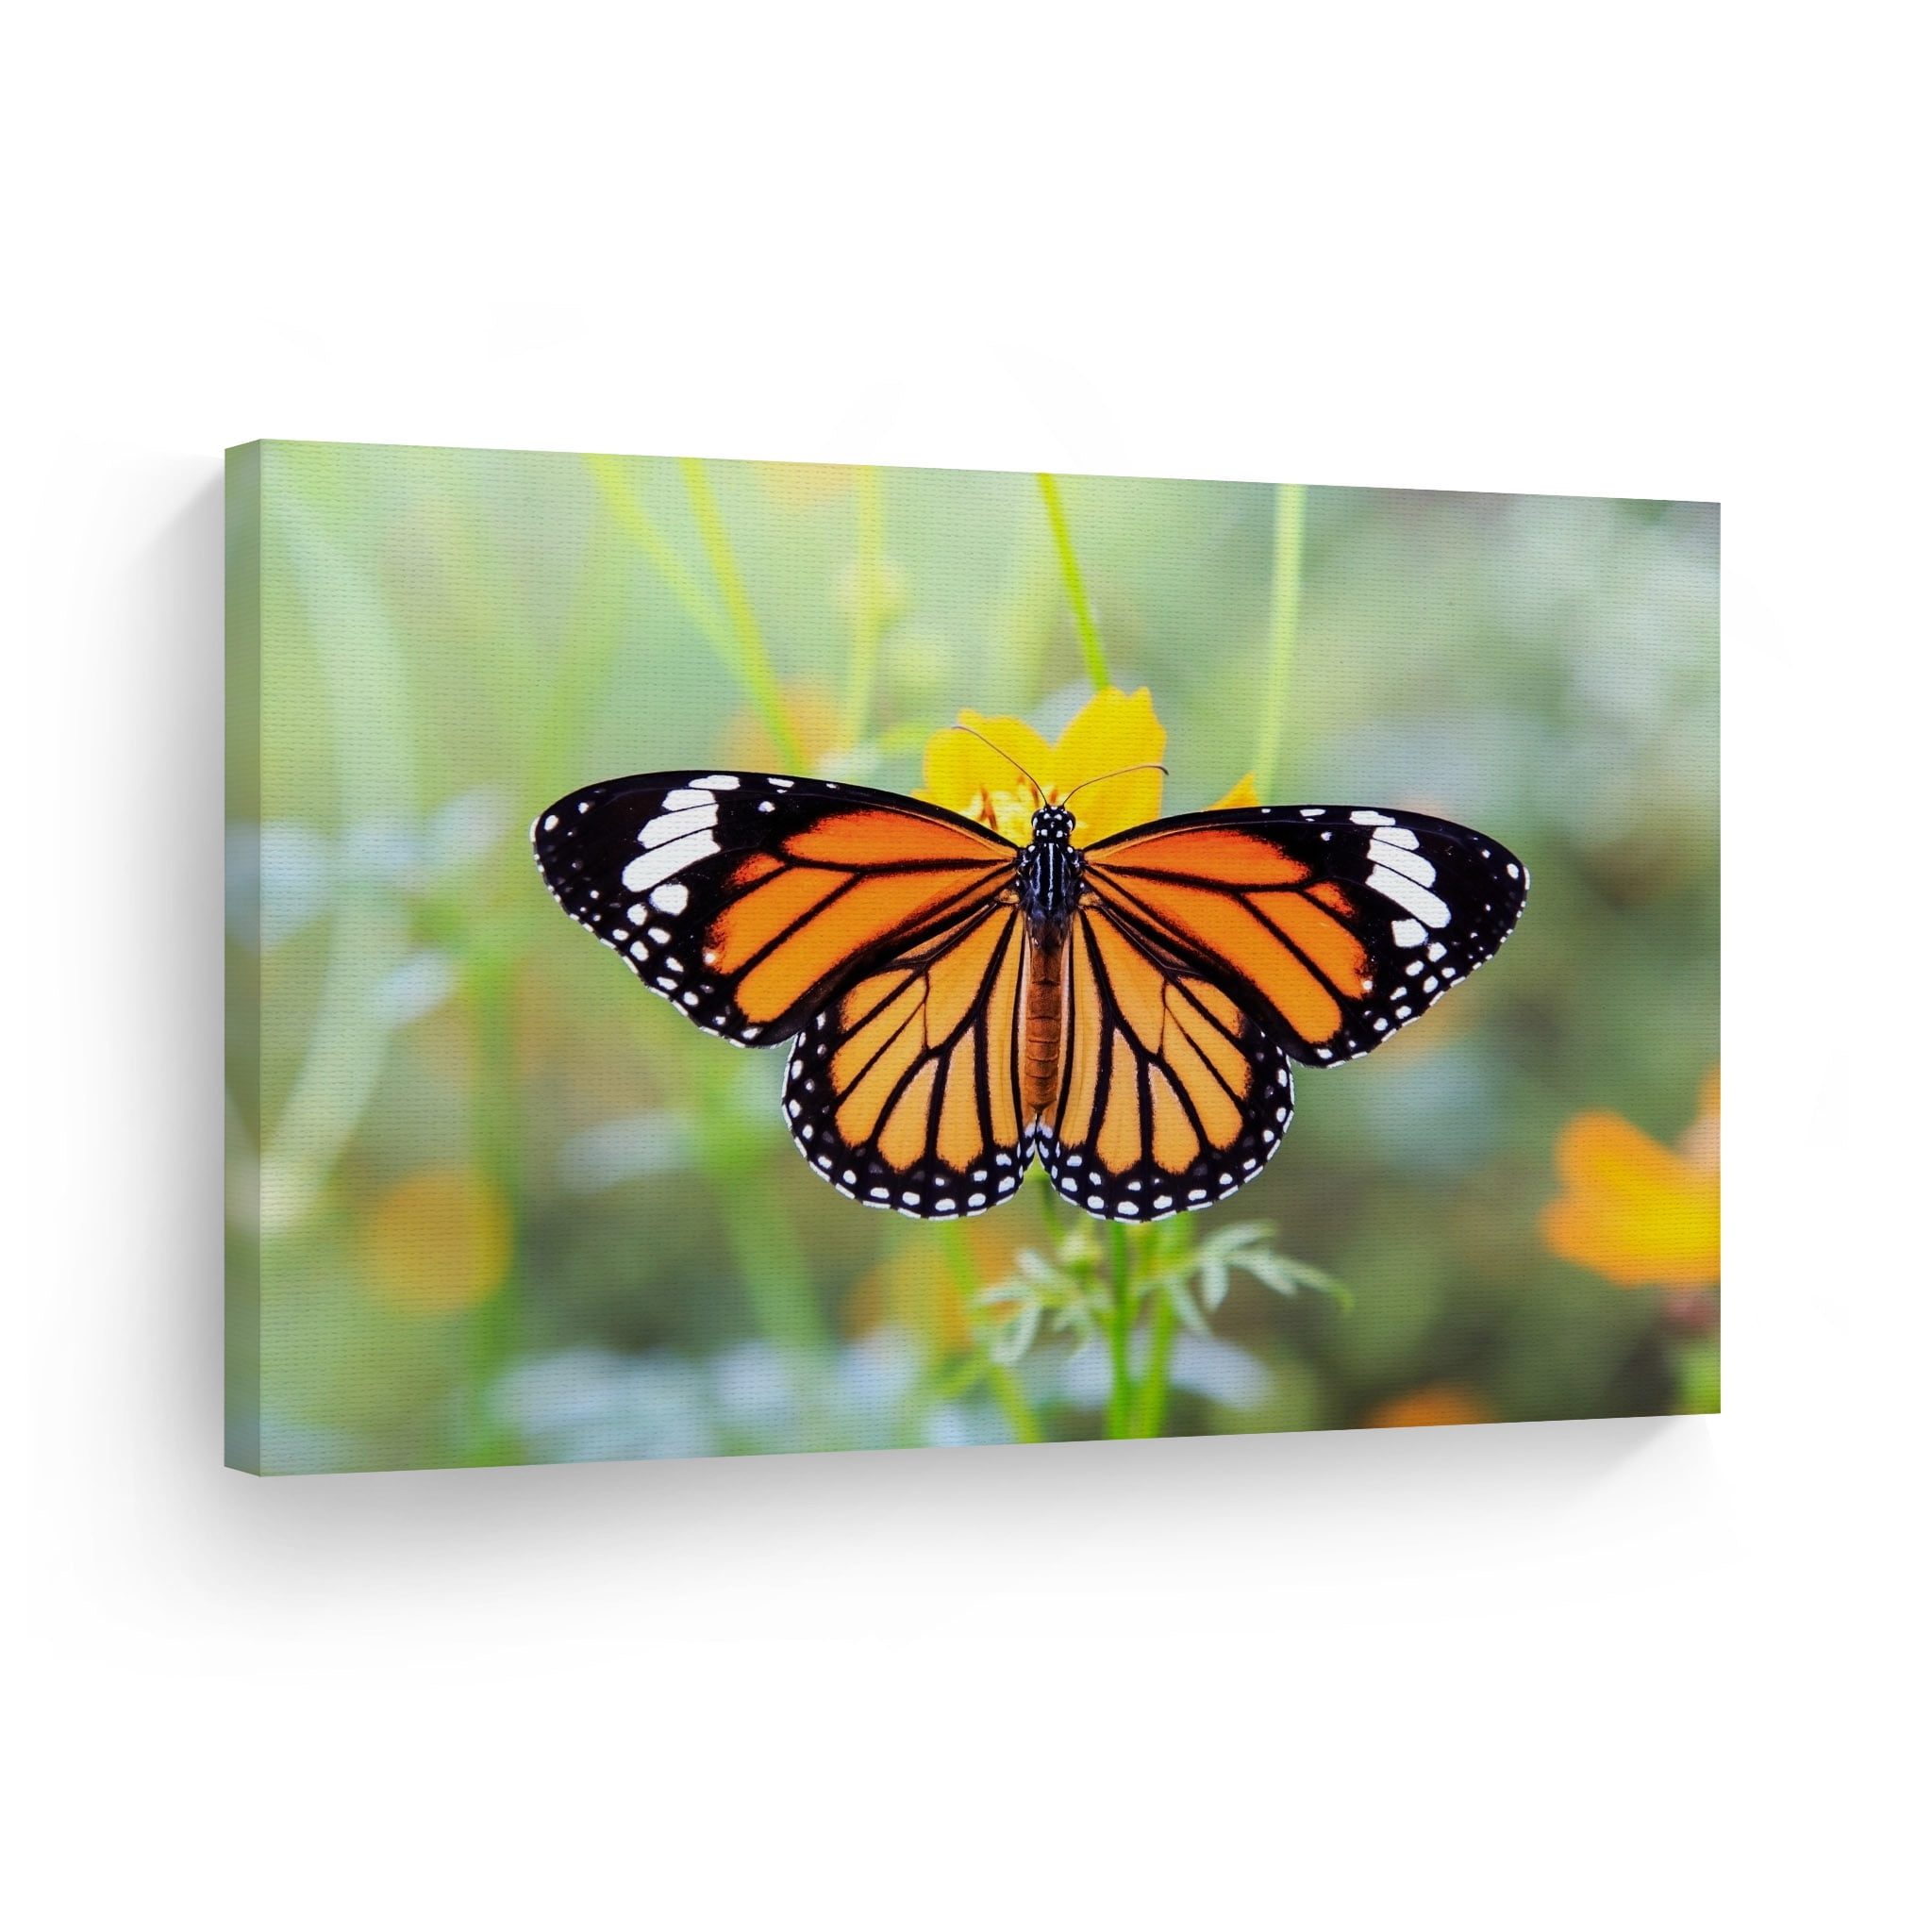 Choose Any 4 of Our Wildlife Nature 8x10 Prints Pictures Photos Butterfly Animal 